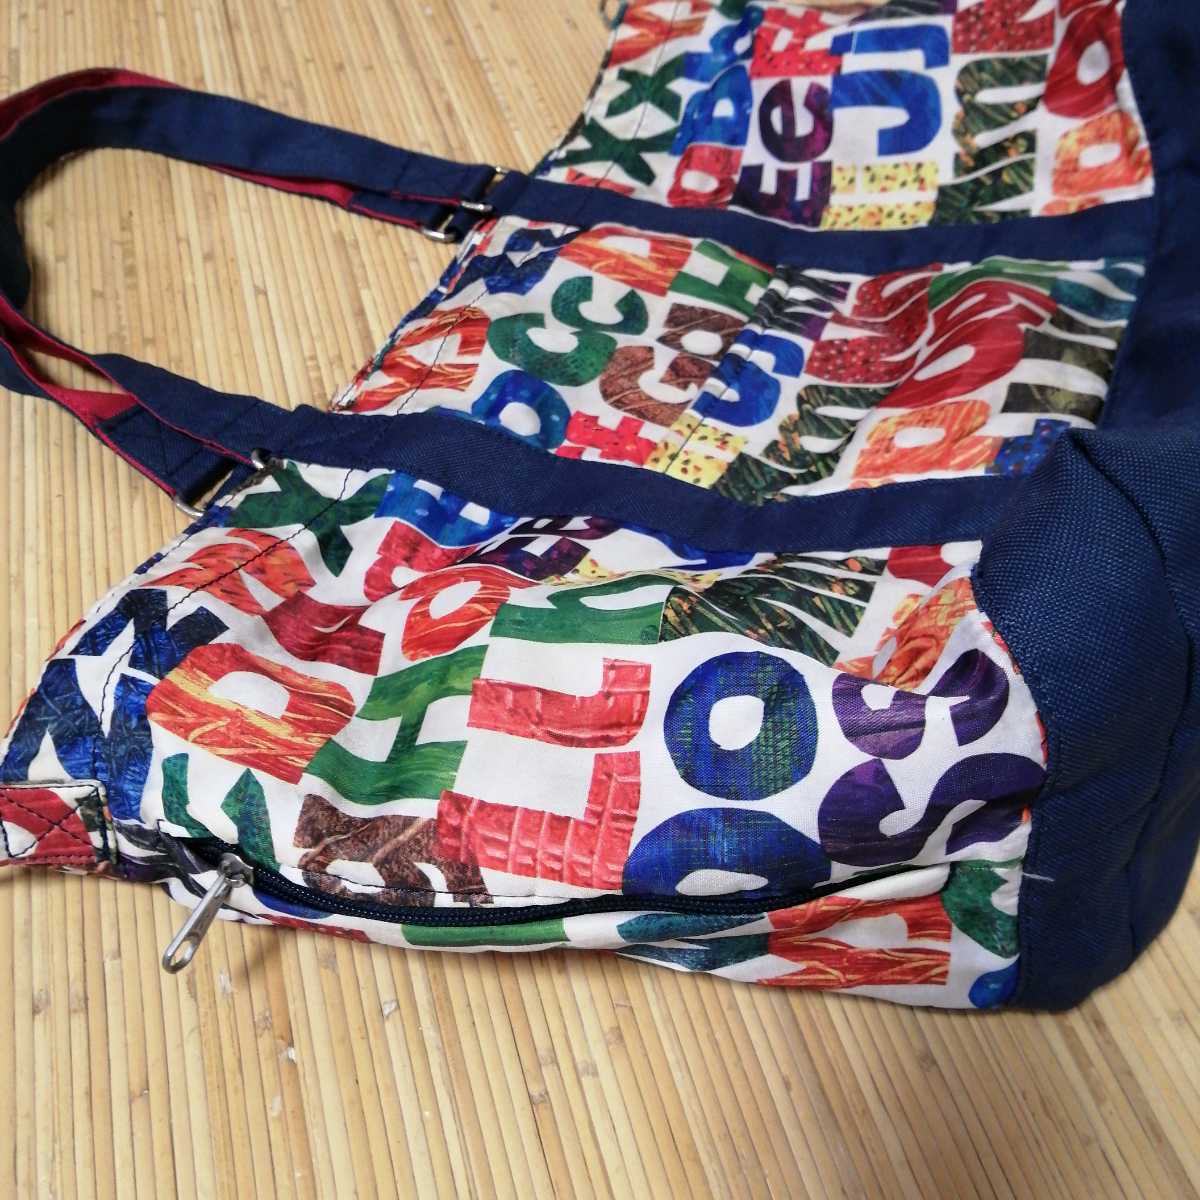  mother z back tote bag is .......ERiC CARLE